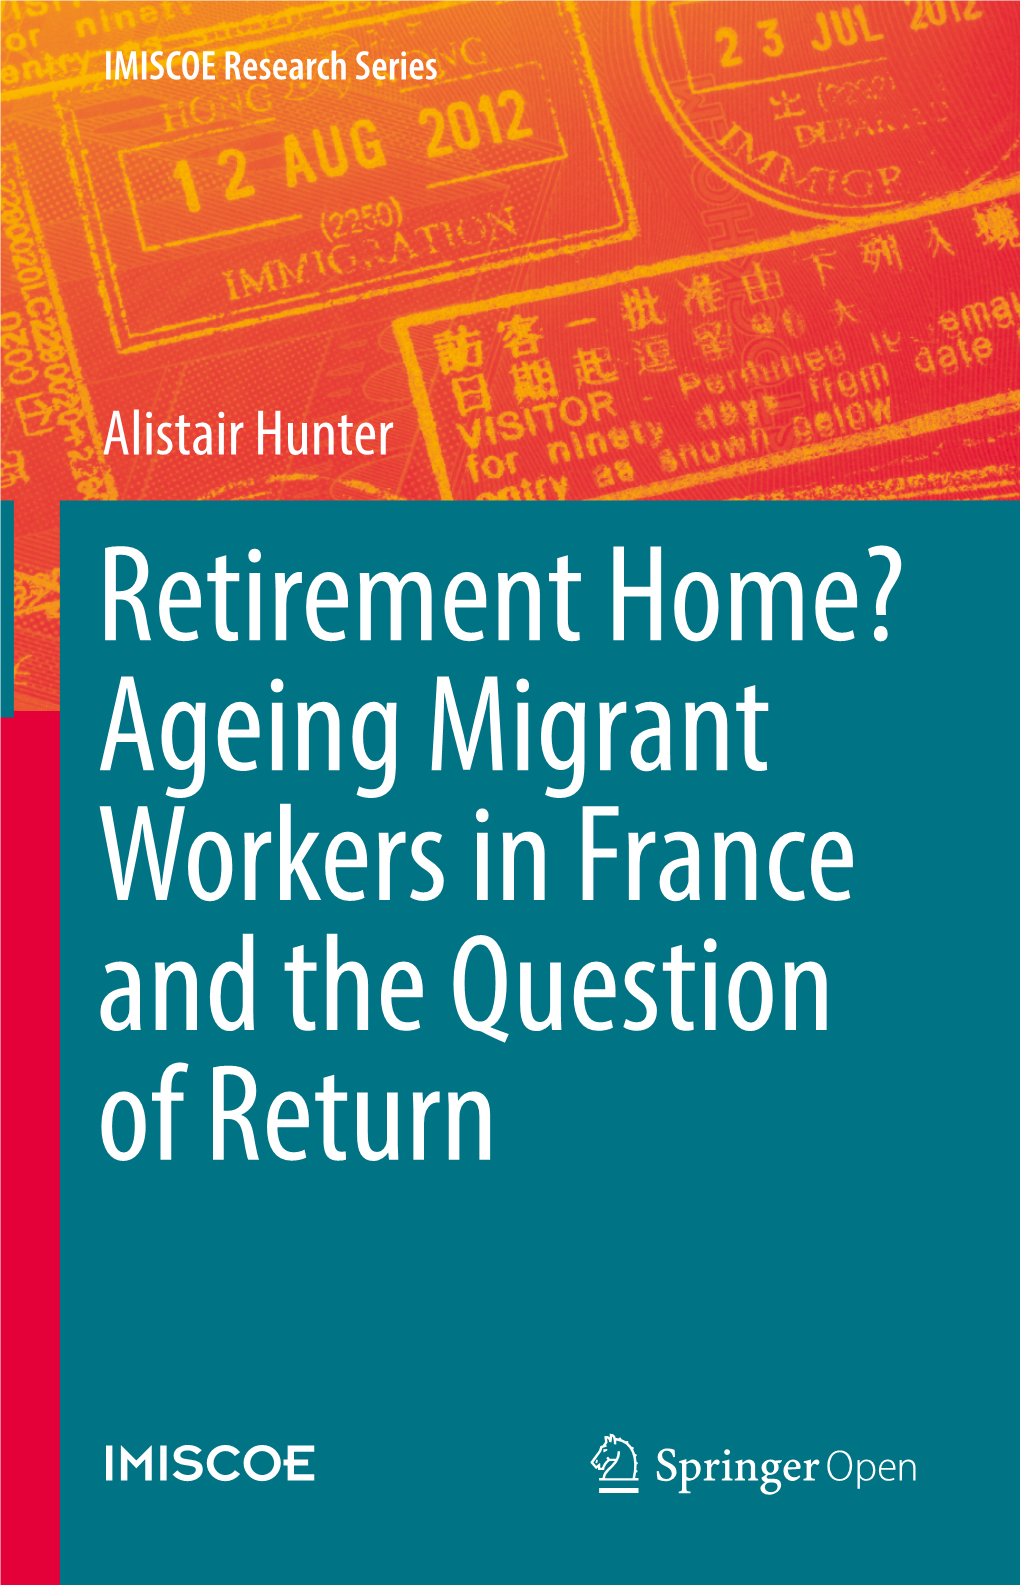 Retirement Home? Ageing Migrant Workers in France and the Question